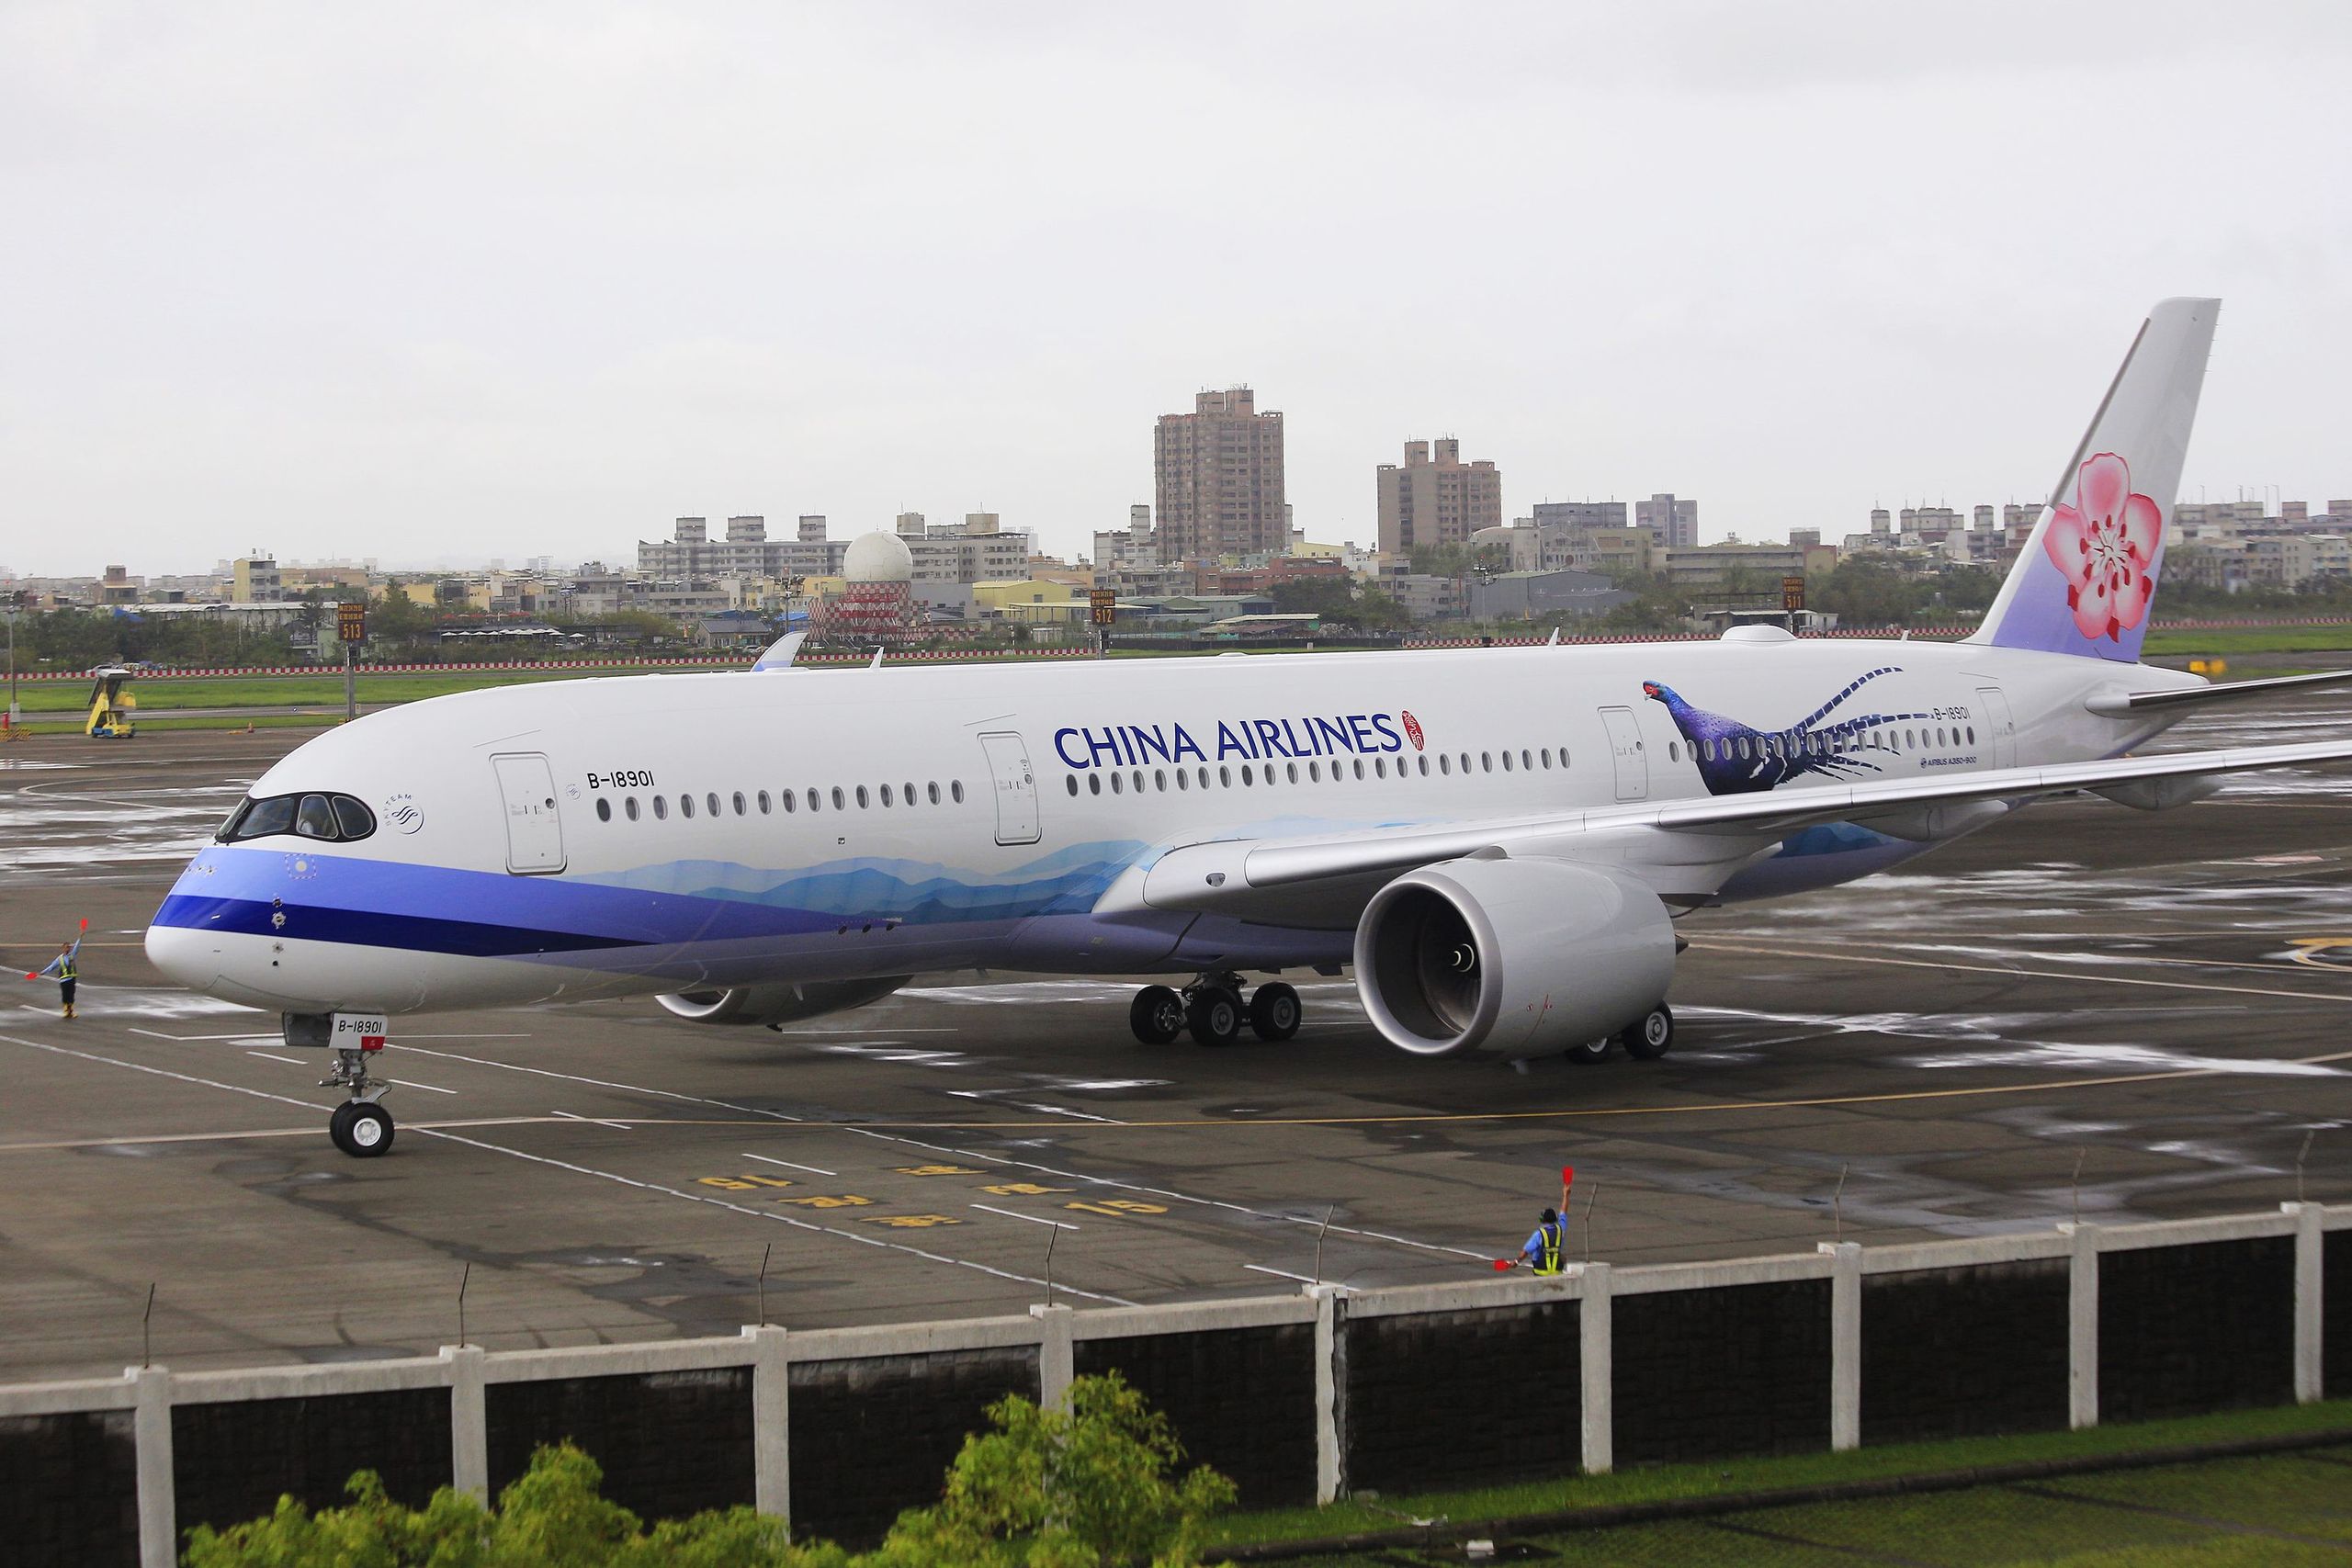 A China Airlines Airbus A350 on the tarmac.